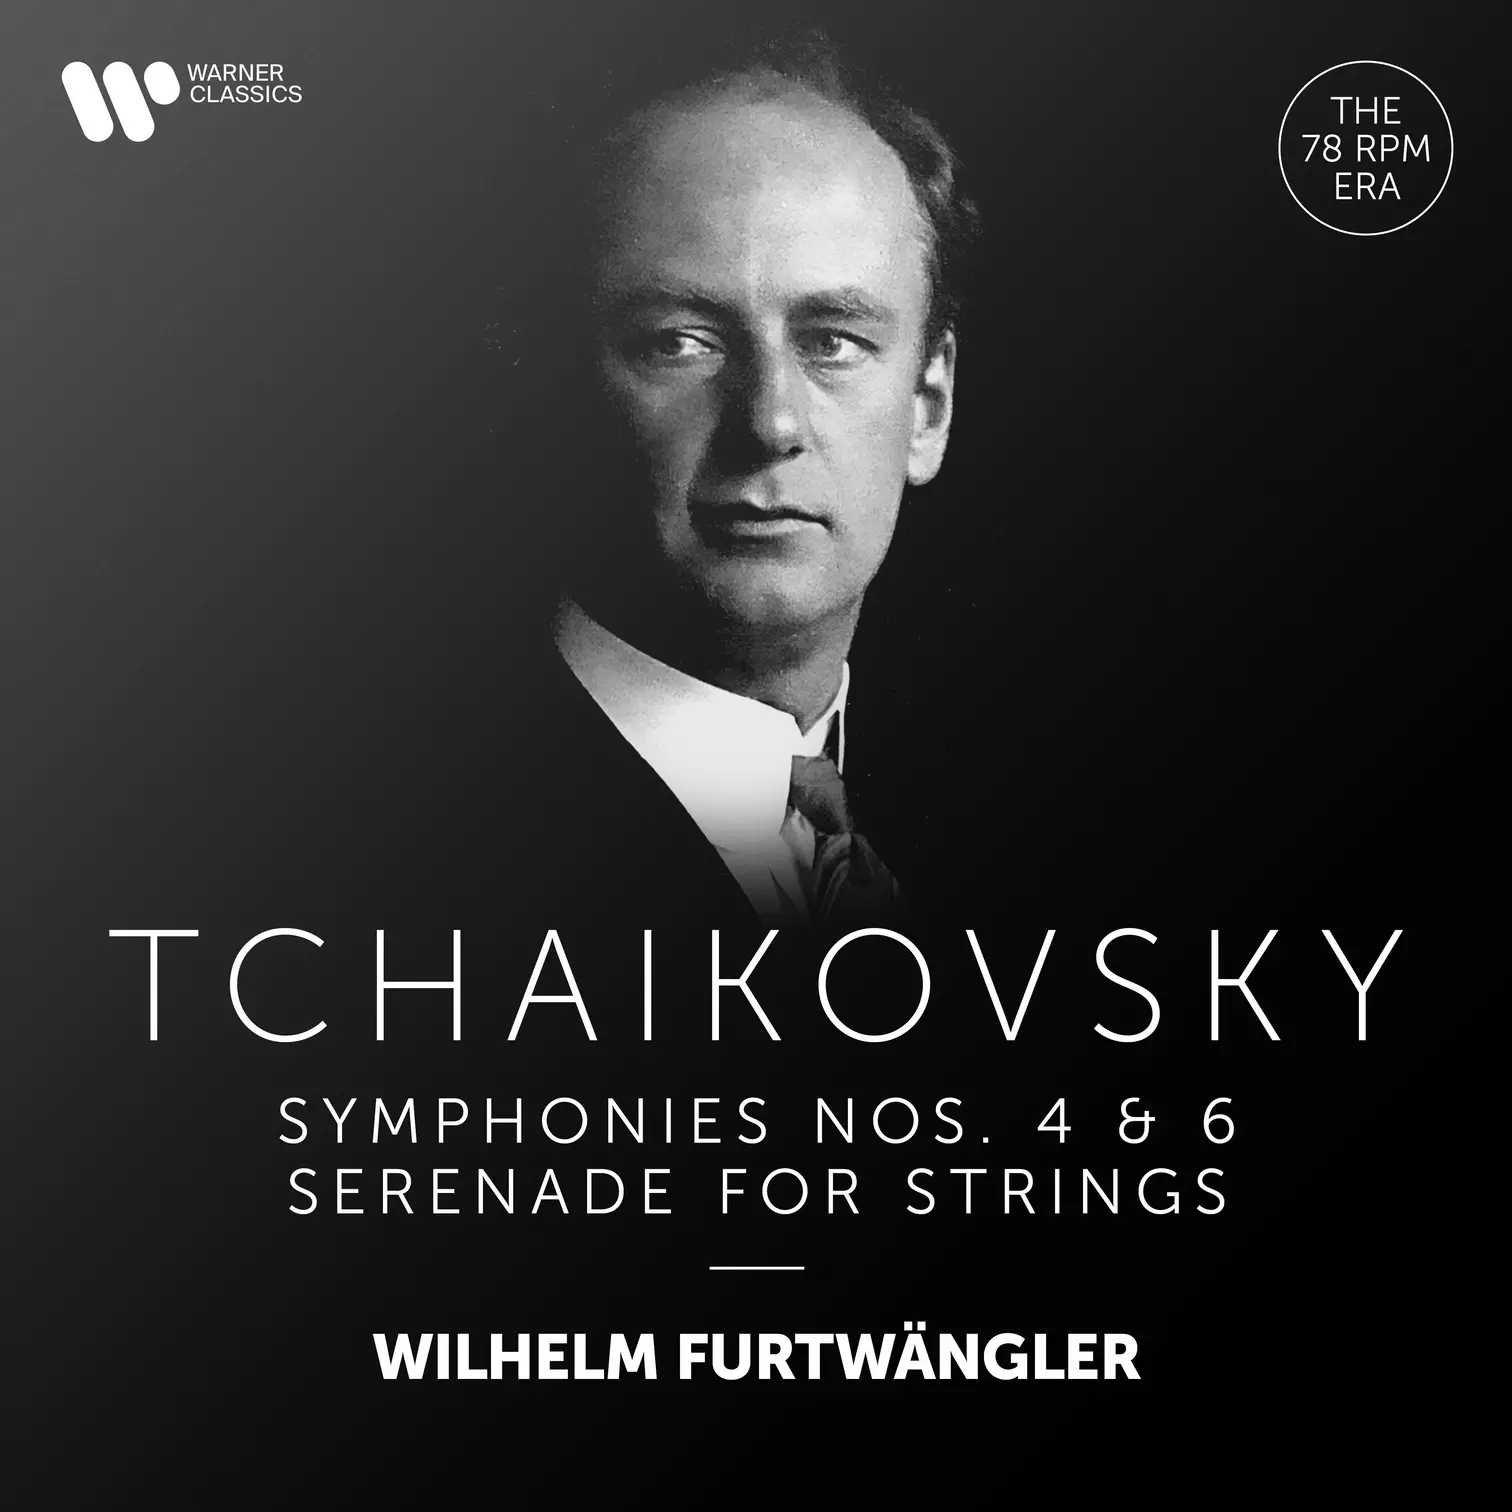 Tchaikovsky: Serenade for Strings & Symphonies Nos. 4 & 6 “Pathétique”